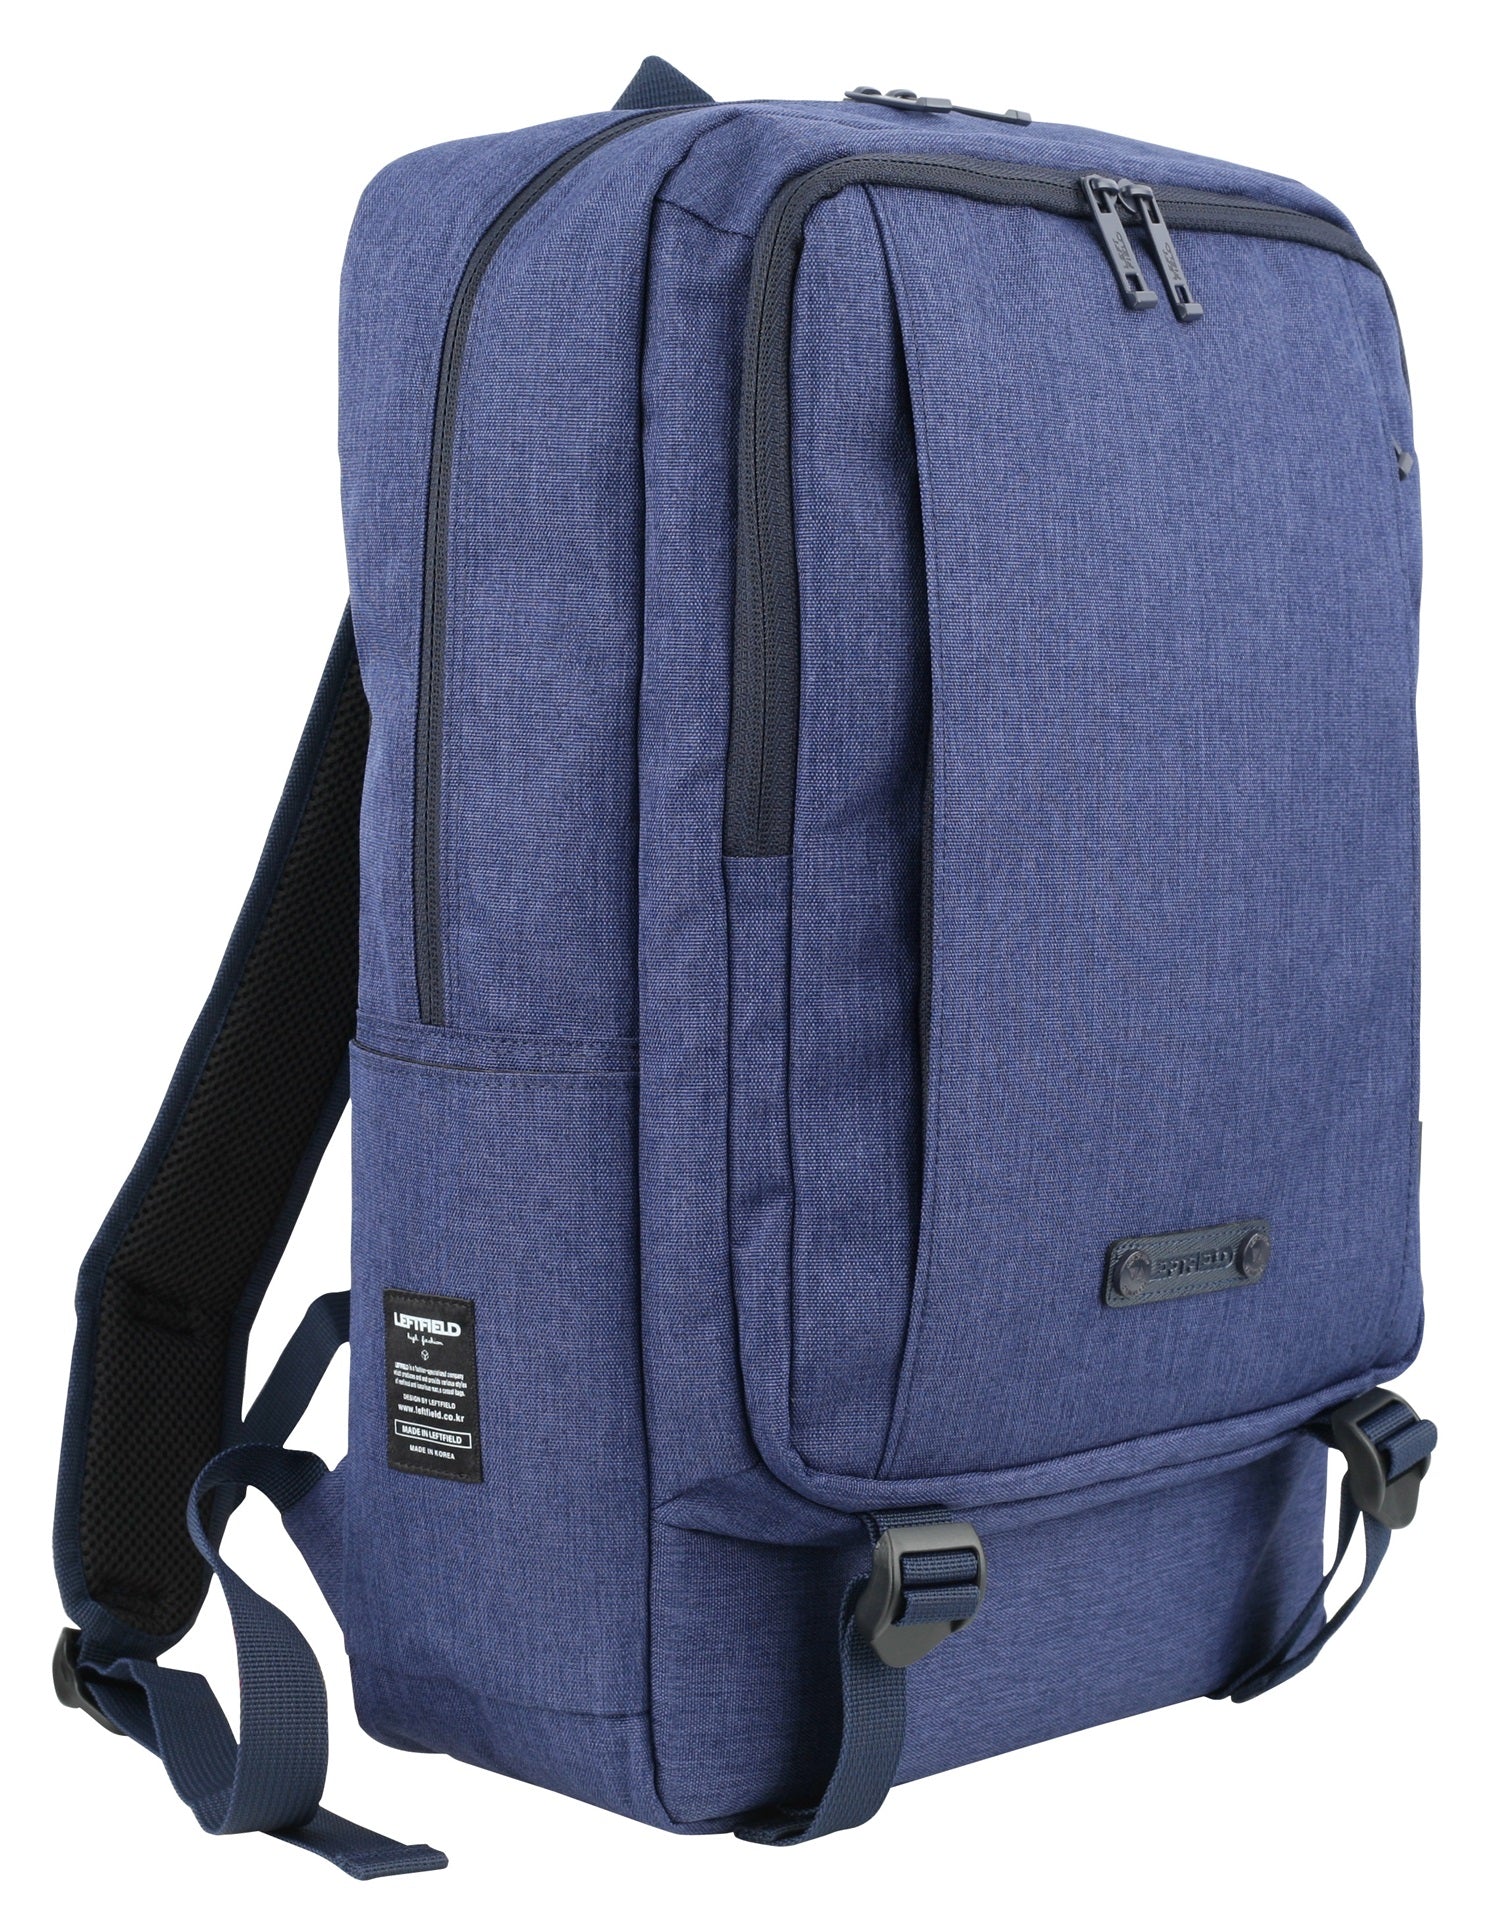 Navy Blue Casual Canvas Business Travel School Backpacks Bags